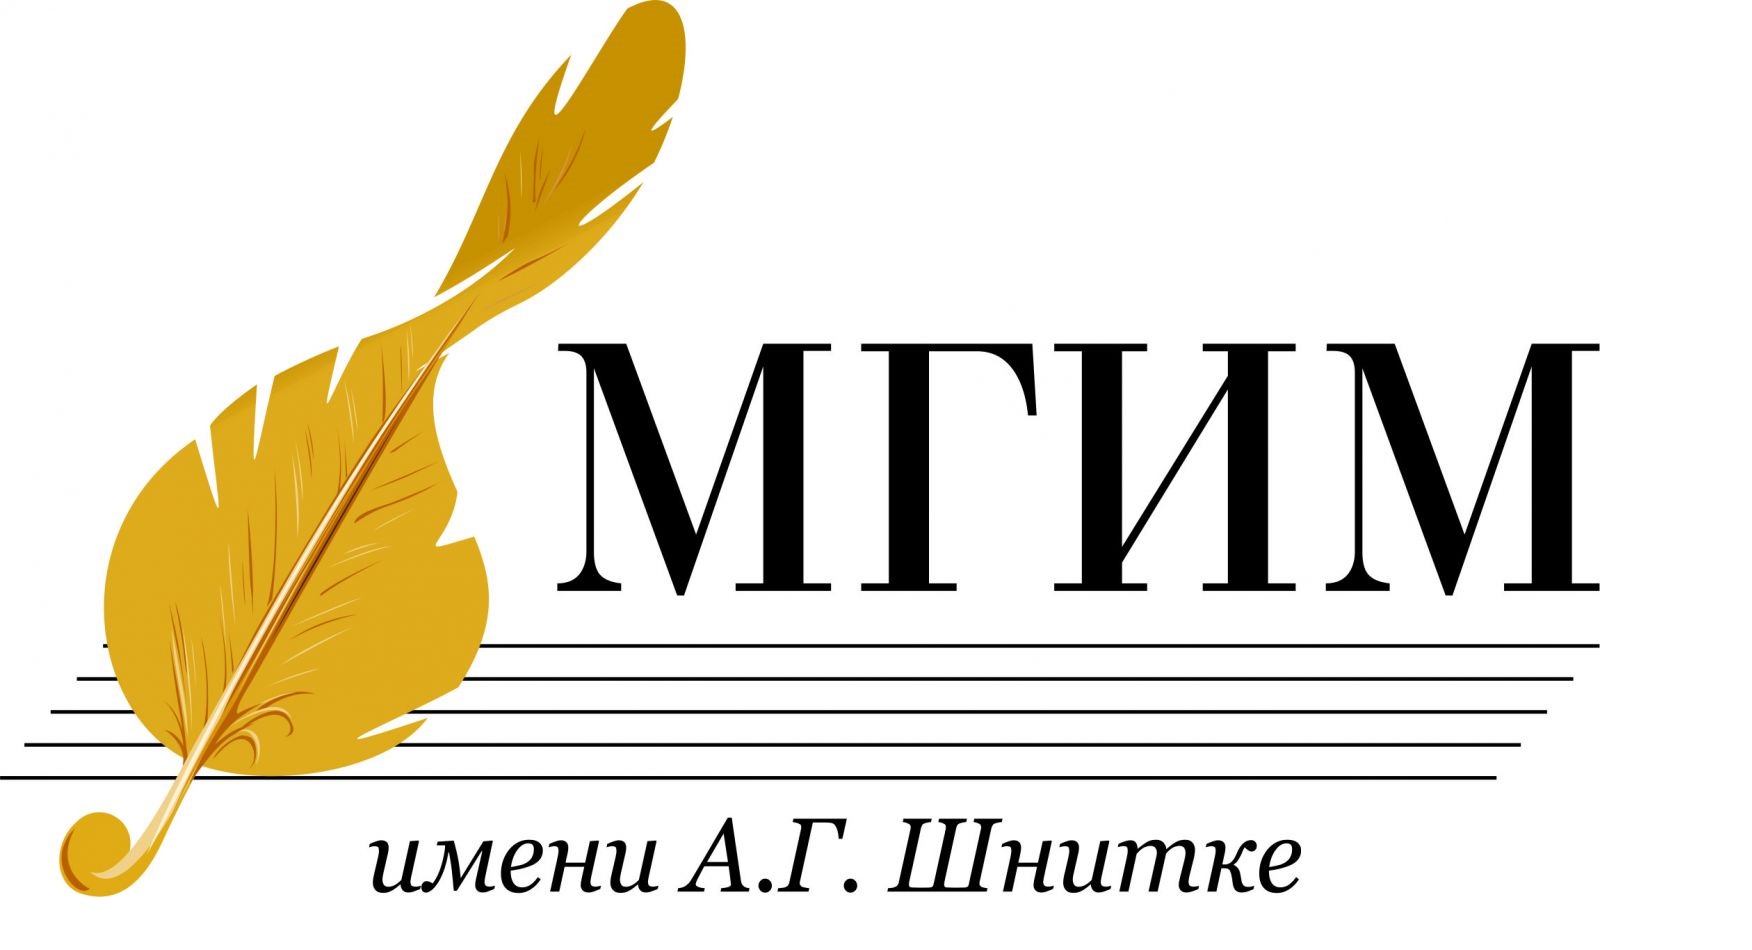 Schnittke Moscow State Institute of Music